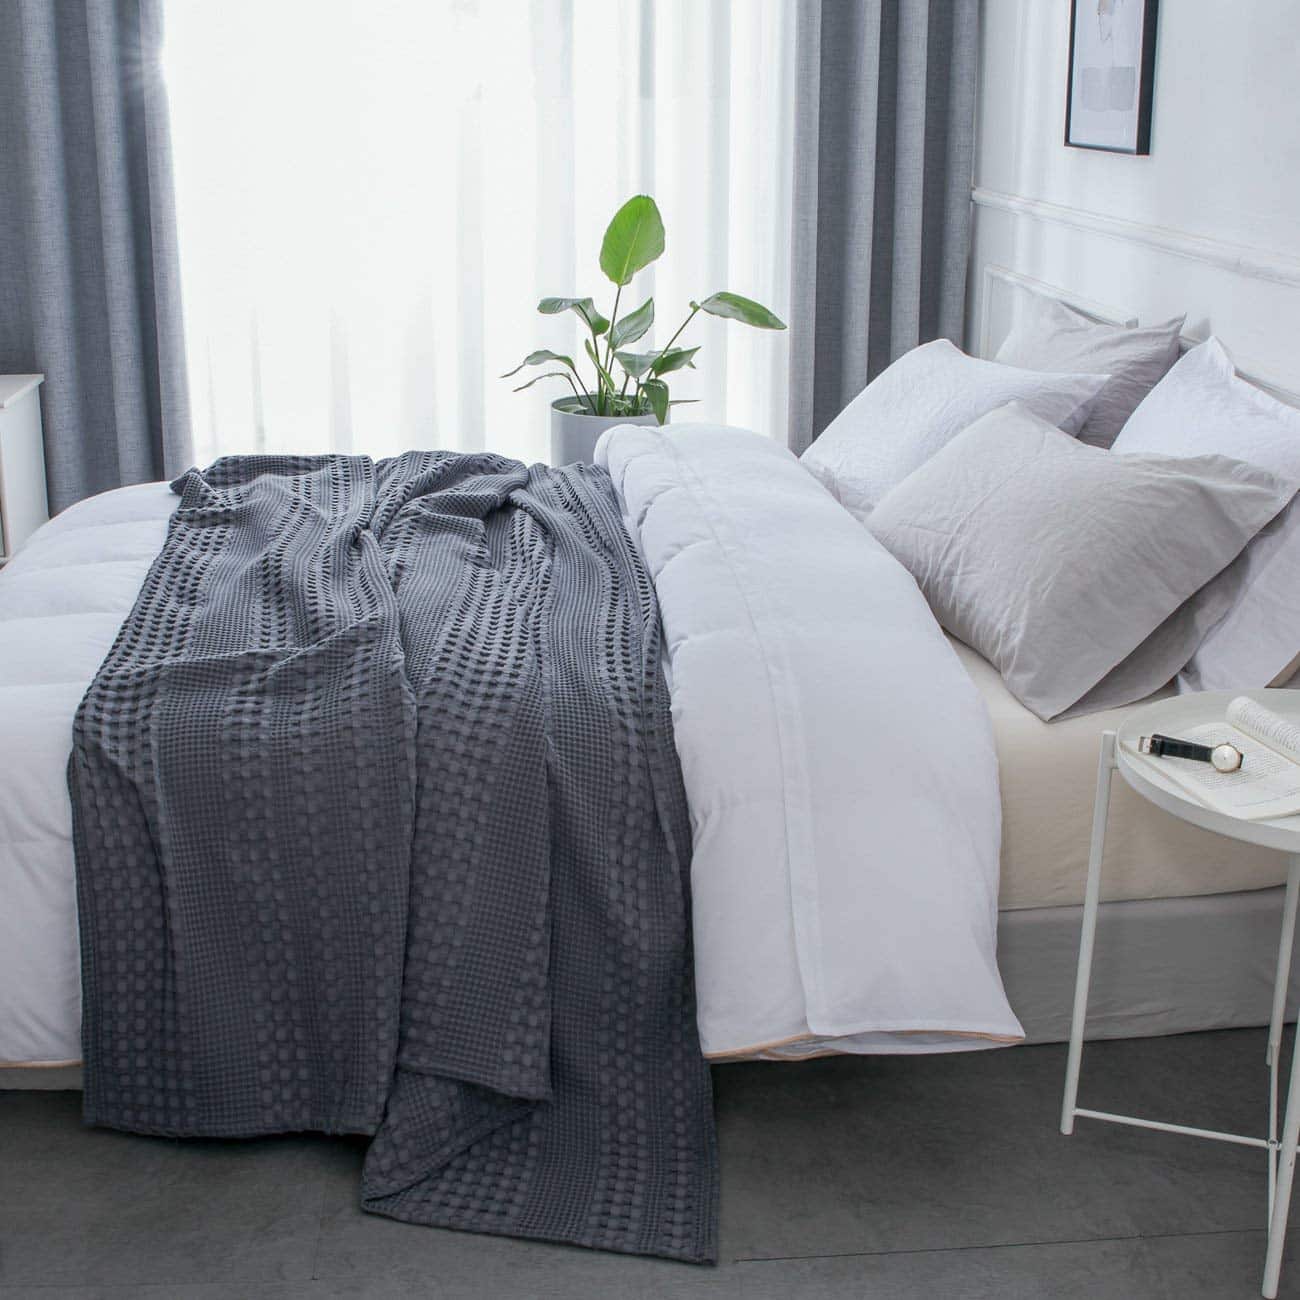 DEAL Of The DAY: Cotton Waffle Weave Blanket – 30% off!